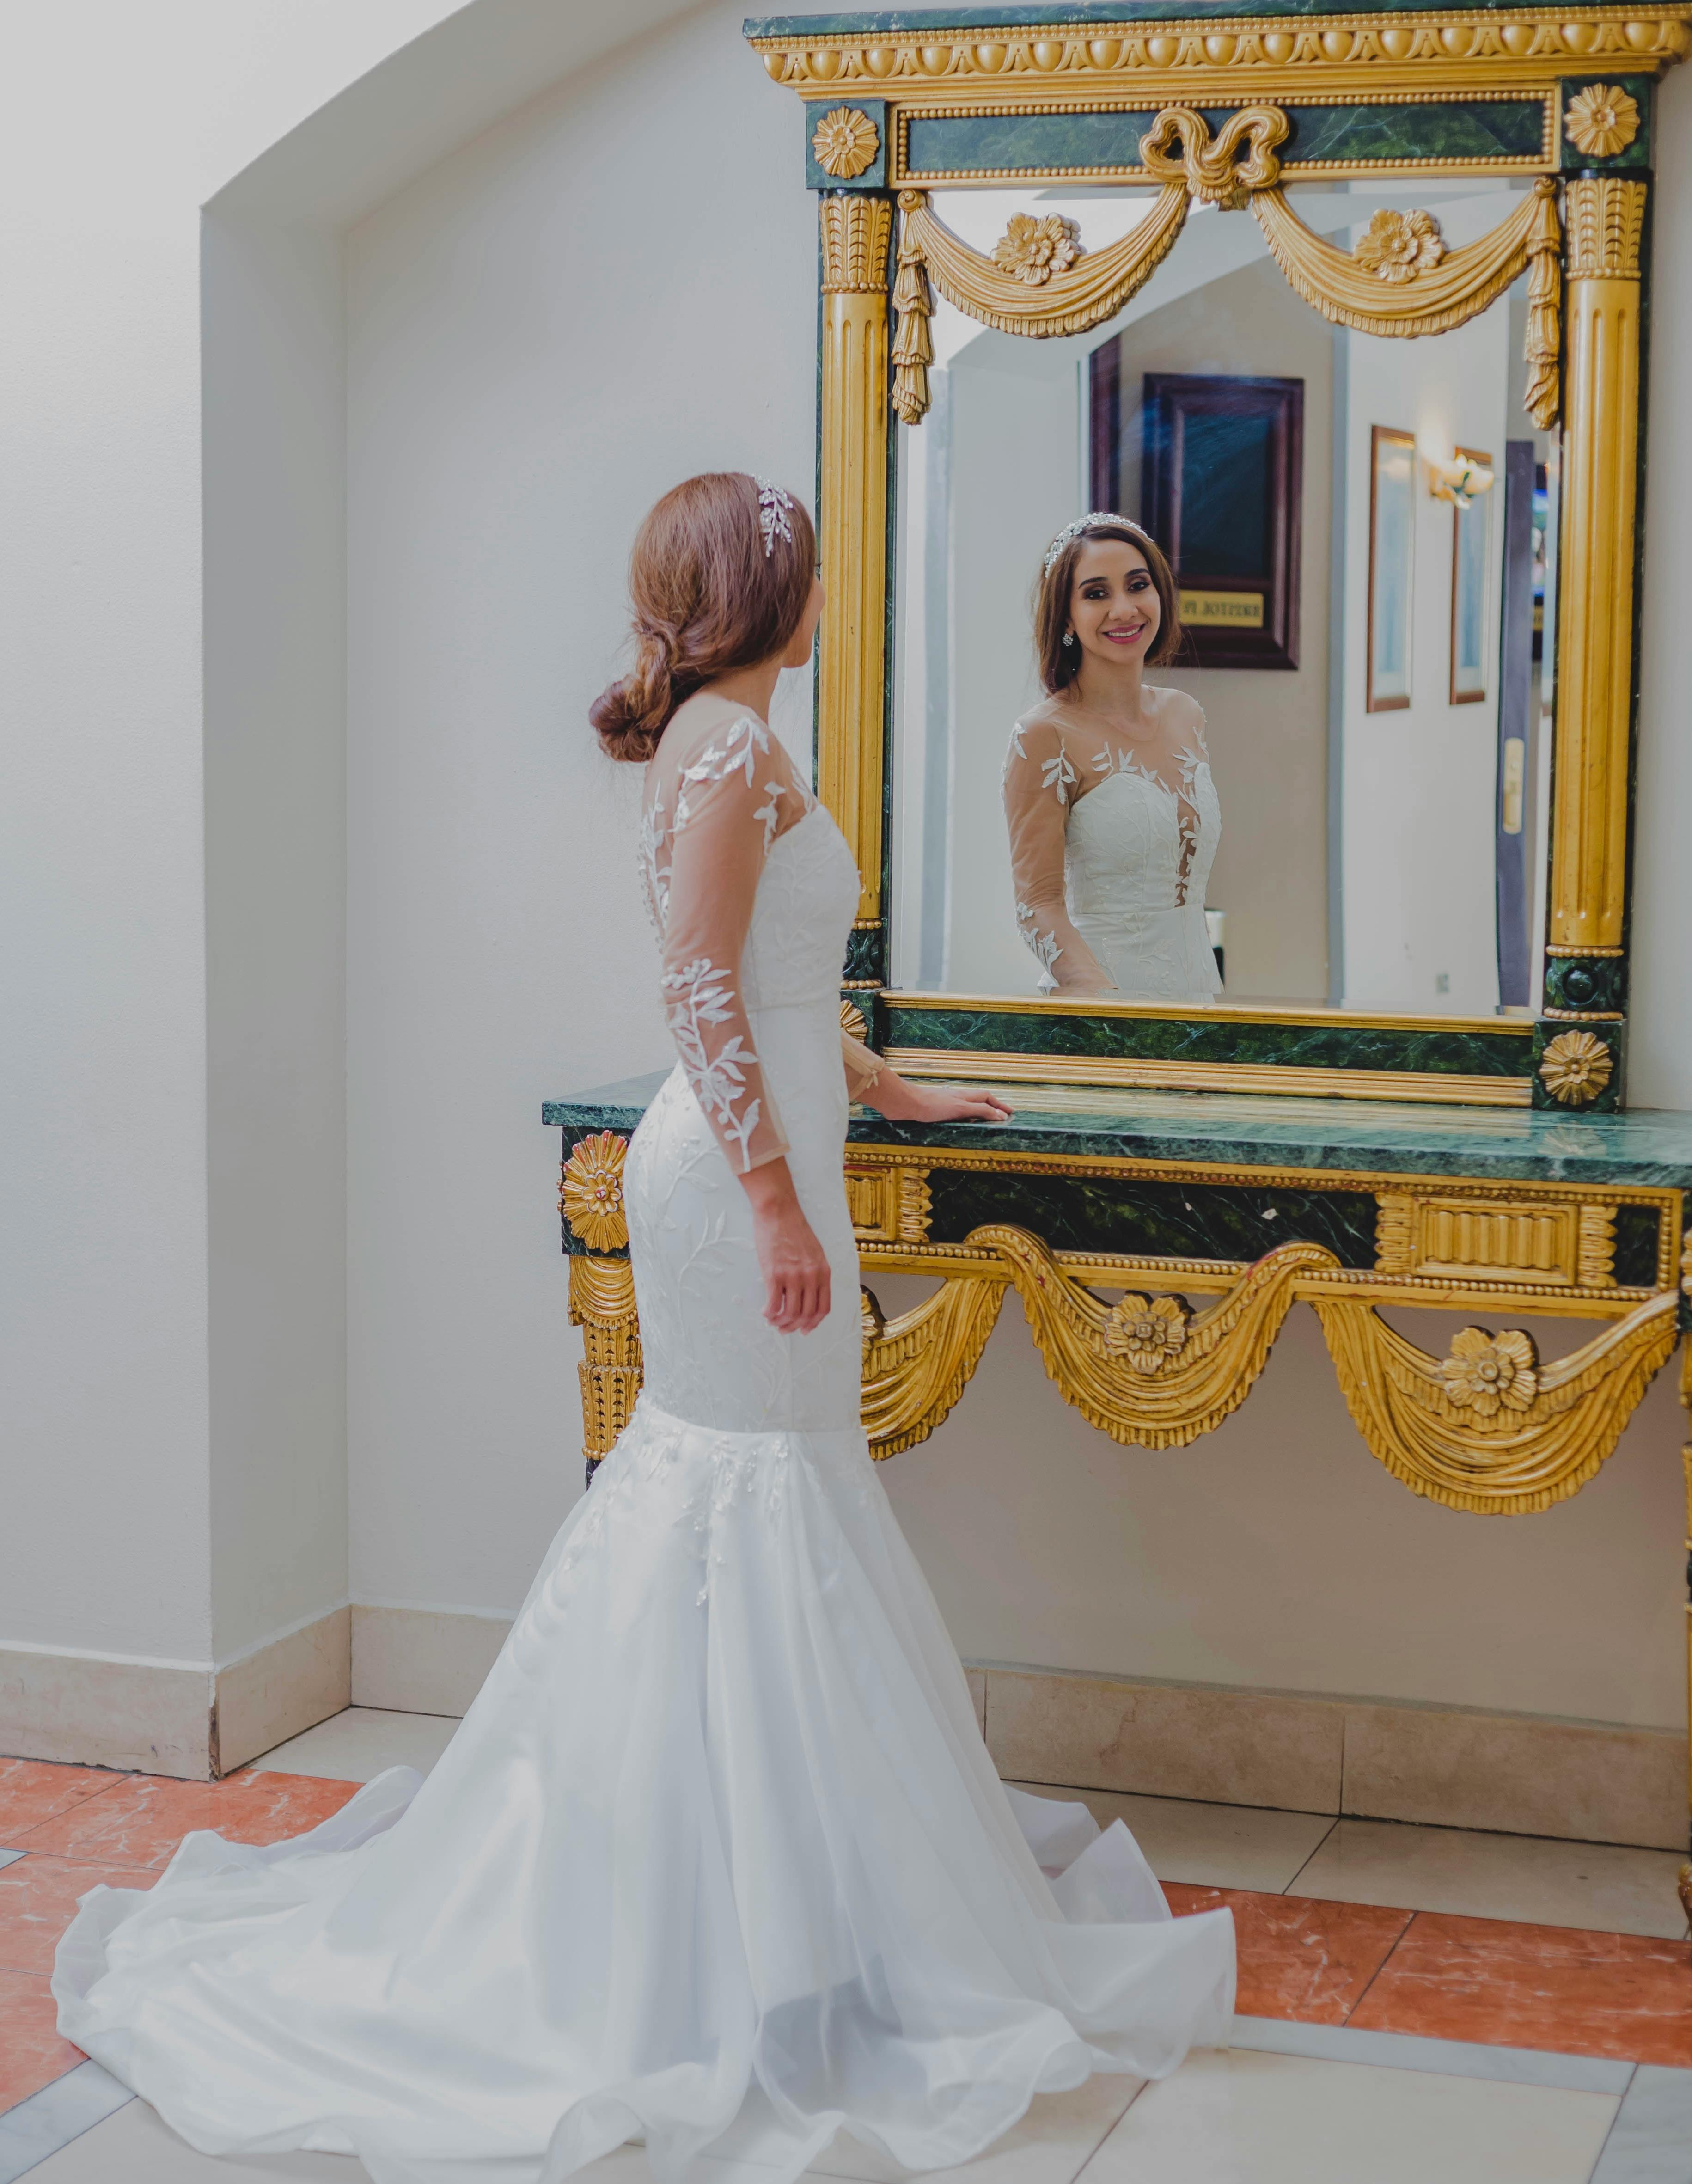 A happy bride looking at herself in a mirror | Source: Pexels